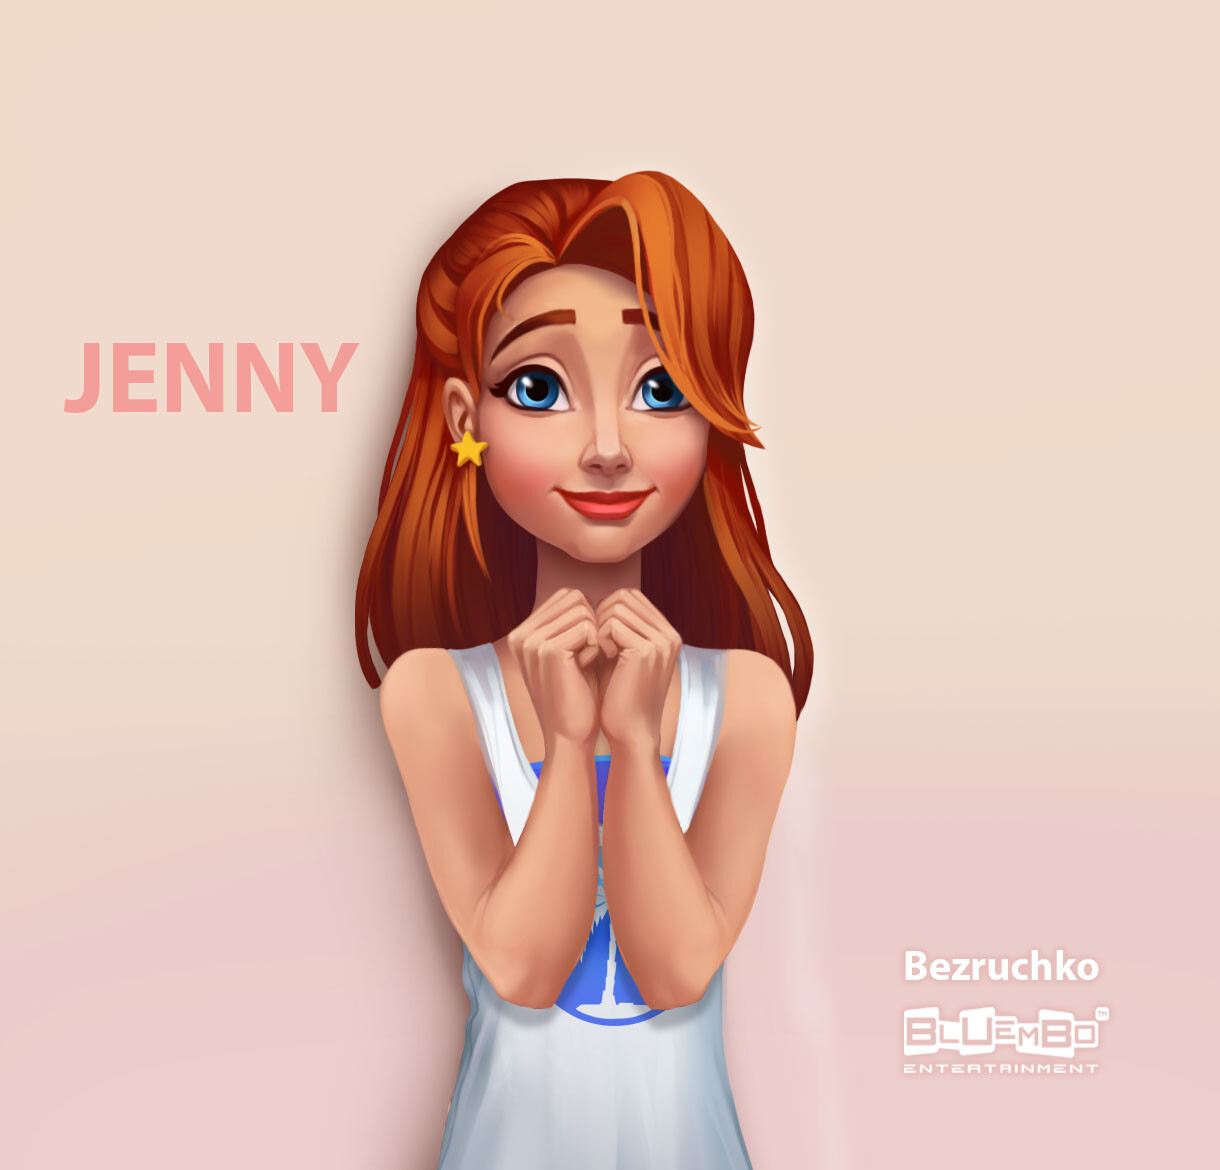 Seemore jenny ComeDepot (SiteRip)